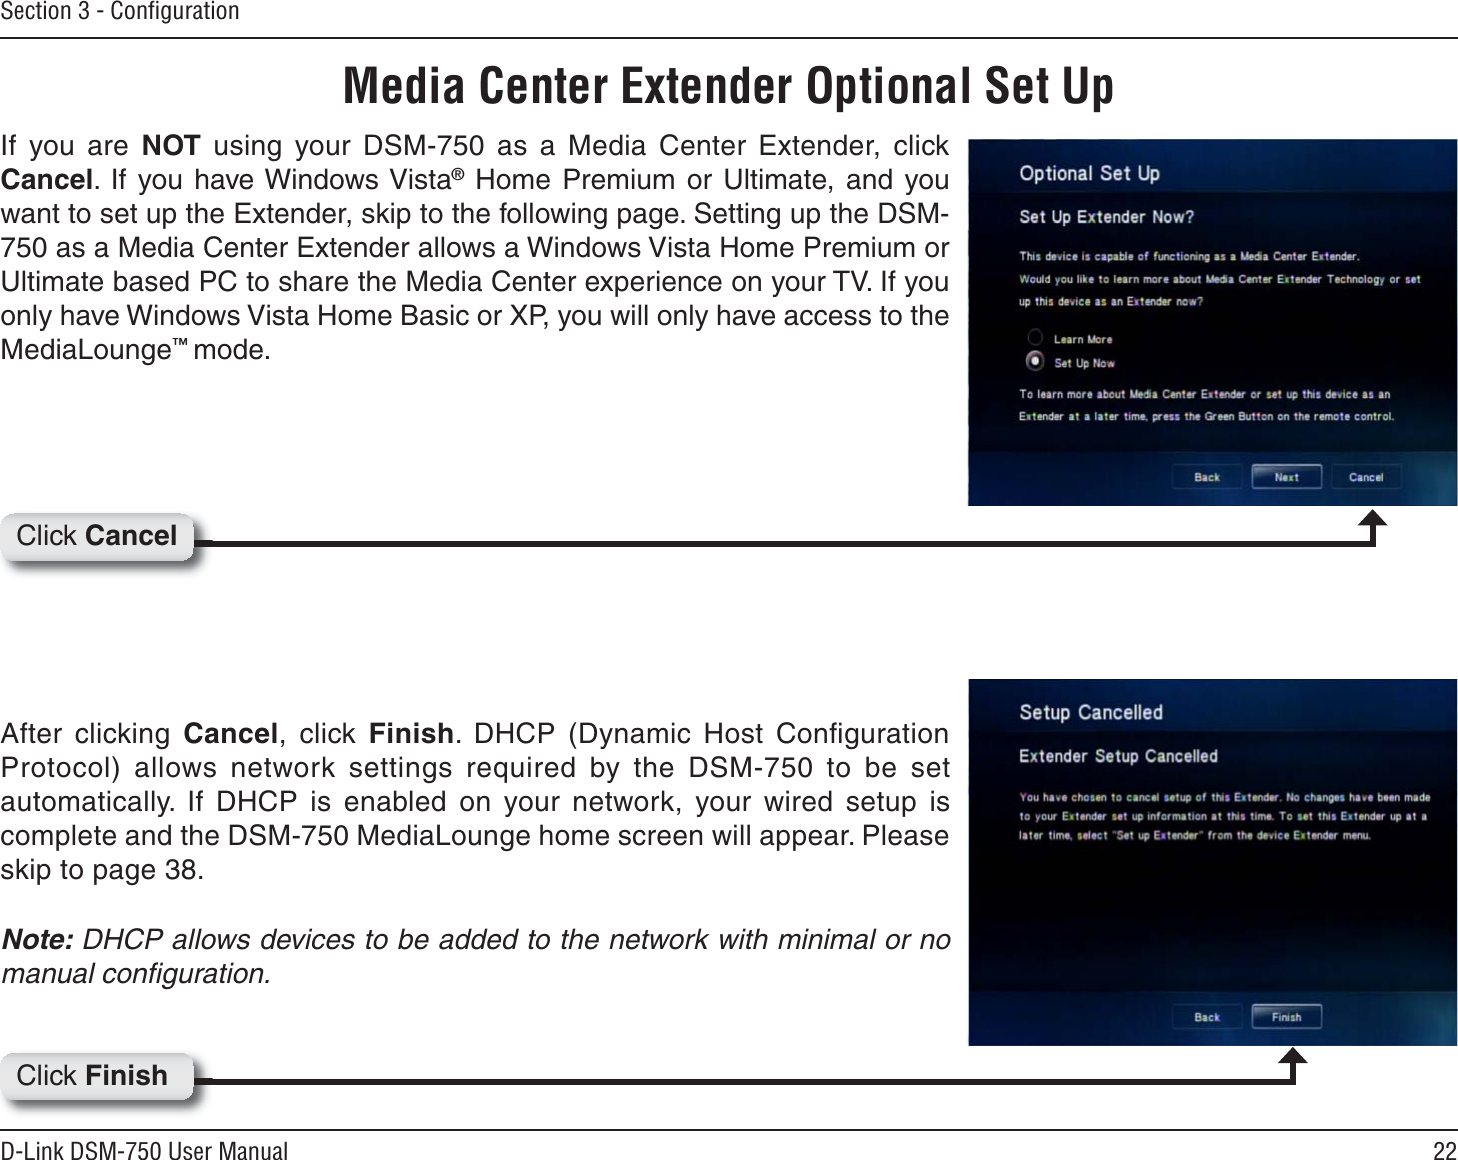 22D-Link DSM-750 User ManualSection 3 - ConﬁgurationMedia Center Extender Optional Set UpIf you are NOT using your DSM-750 as a Media Center Extender, click Cancel. If you have Windows Vista® Home Premium or Ultimate, and you want to set up the Extender, skip to the following page. Setting up the DSM-750 as a Media Center Extender allows a Windows Vista Home Premium or Ultimate based PC to share the Media Center experience on your TV. If you only have Windows Vista Home Basic or XP, you will only have access to the MediaLounge™mode.After clicking Cancel, click Finish. DHCP (Dynamic Host Conﬁguration Protocol) allows network settings required by the DSM-750 to be set automatically. If DHCP is enabled on your network, your wired setup is complete and the DSM-750 MediaLounge home screen will appear. Please skip to page 38.Note: DHCP allows devices to be added to the network with minimal or no manual conﬁguration.Click CancelClick Finish